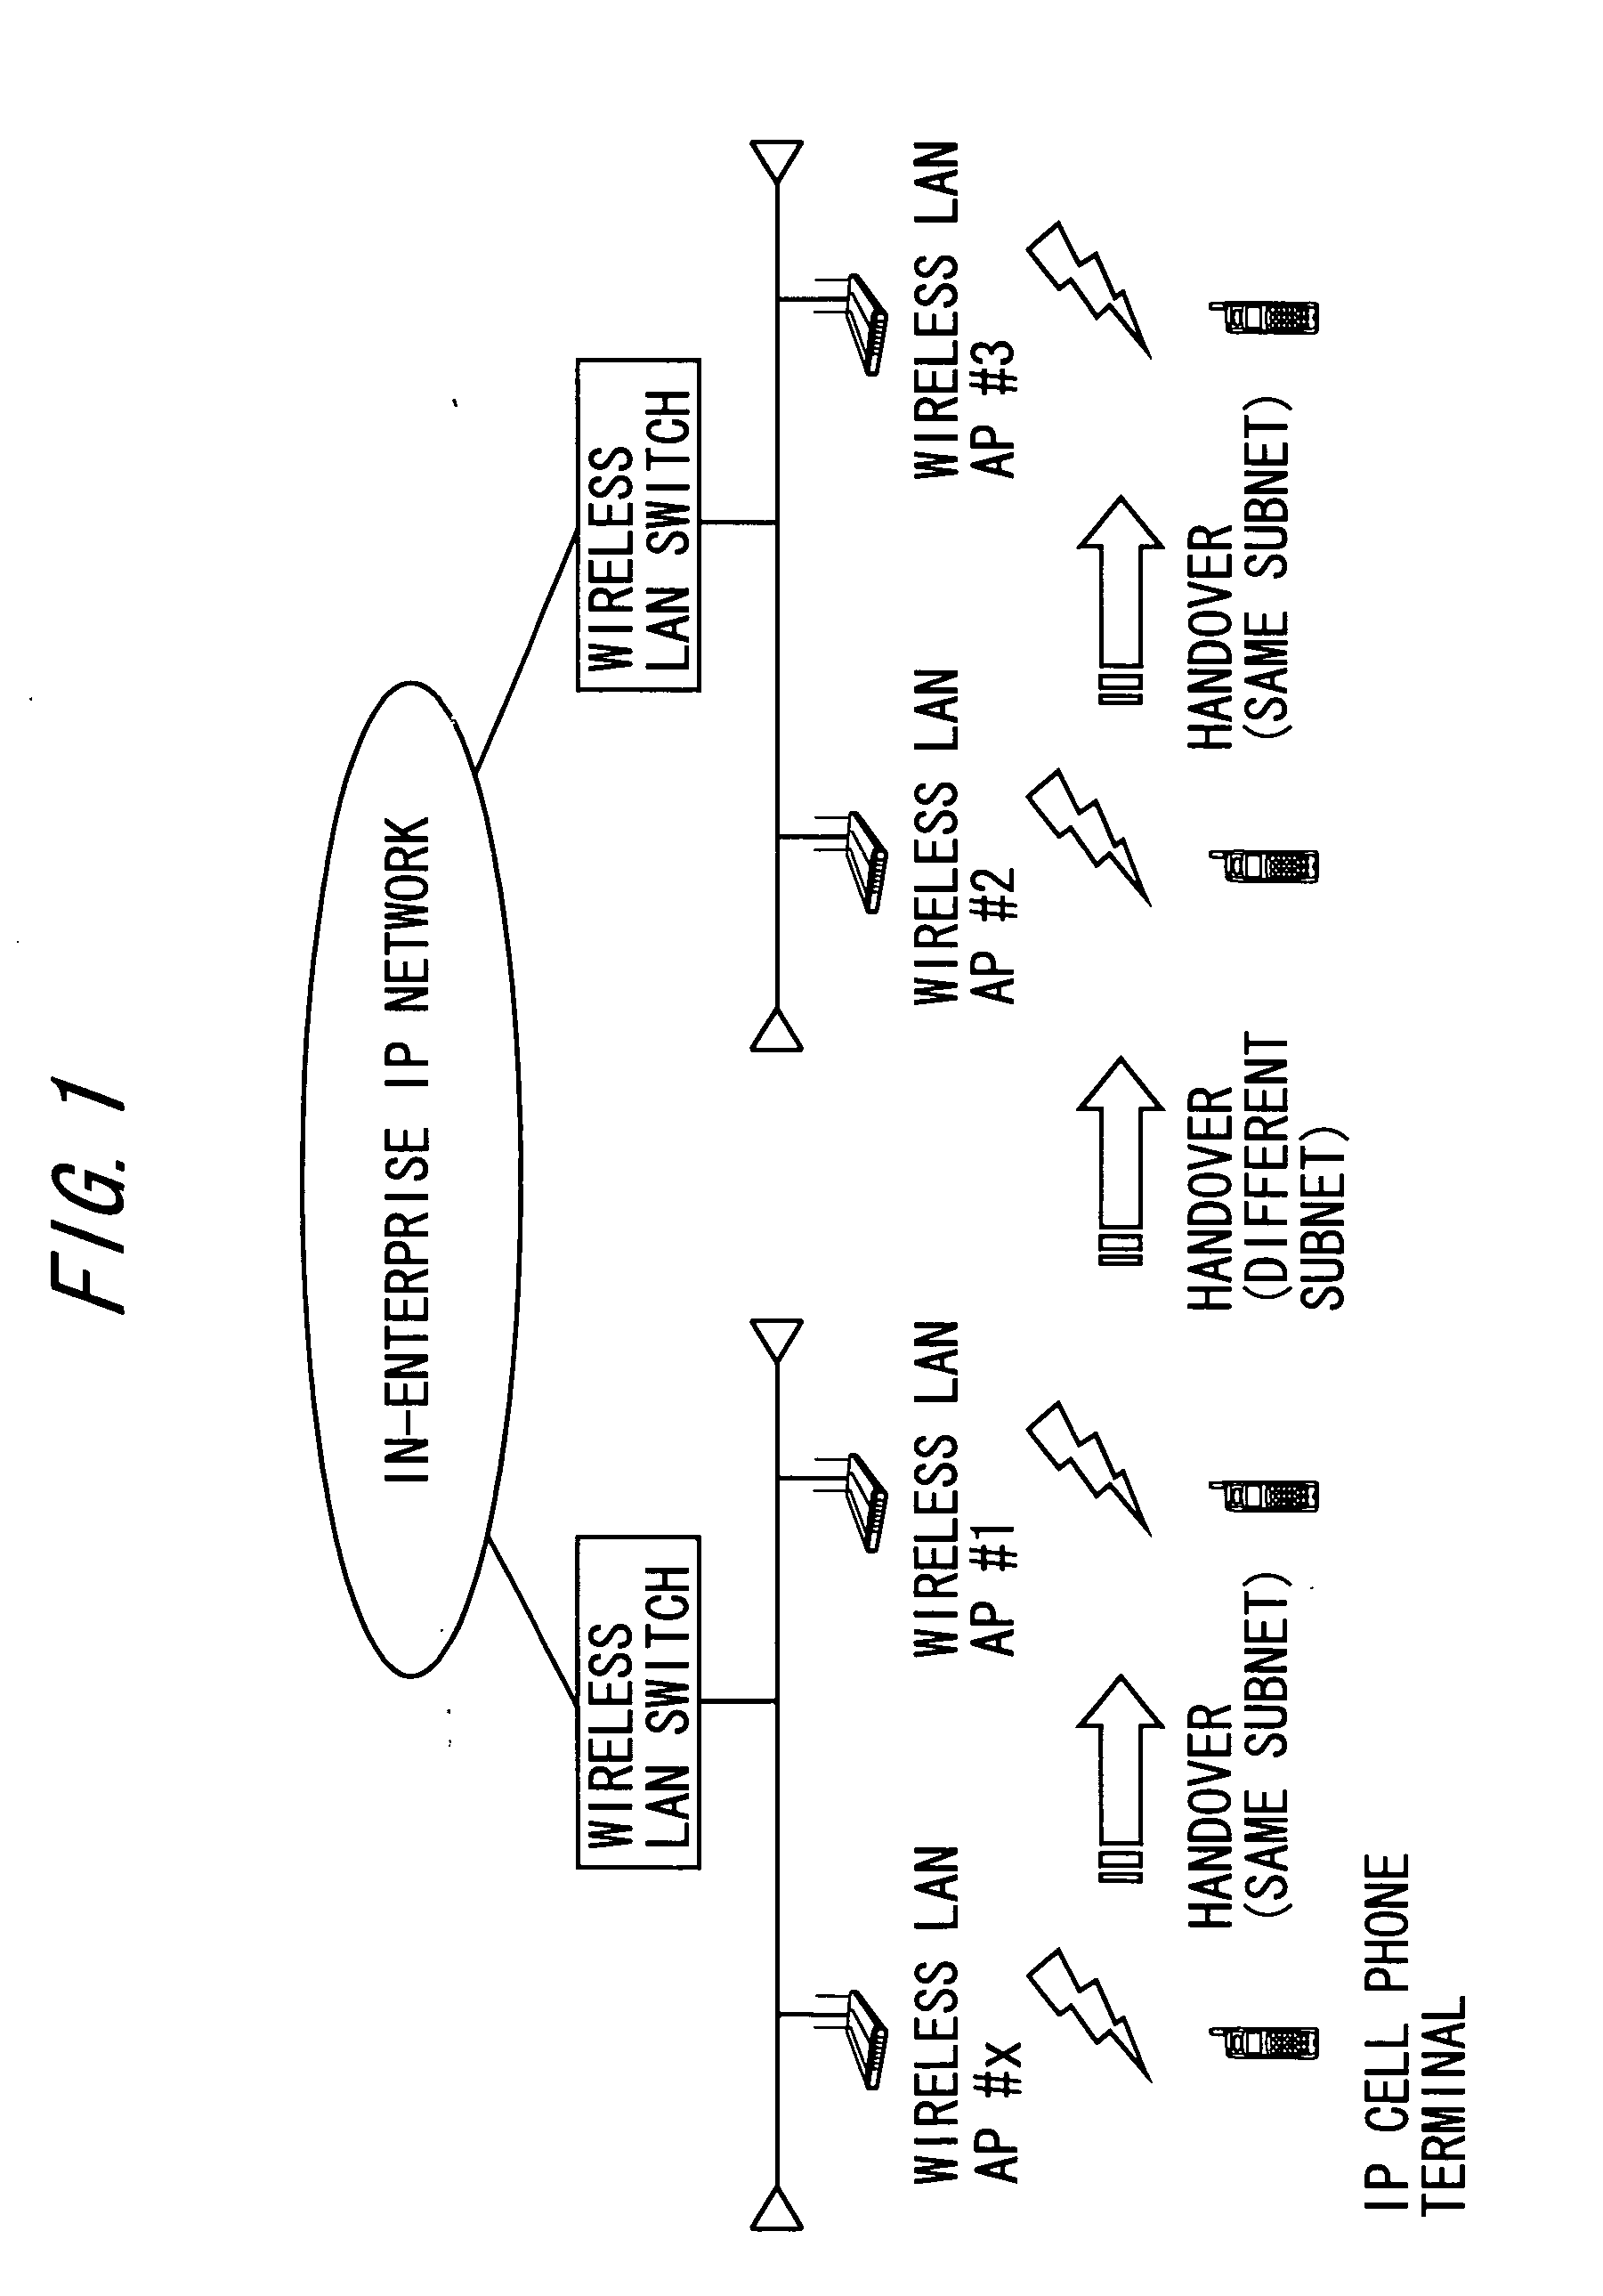 Large-scale wide area network system having location information management function